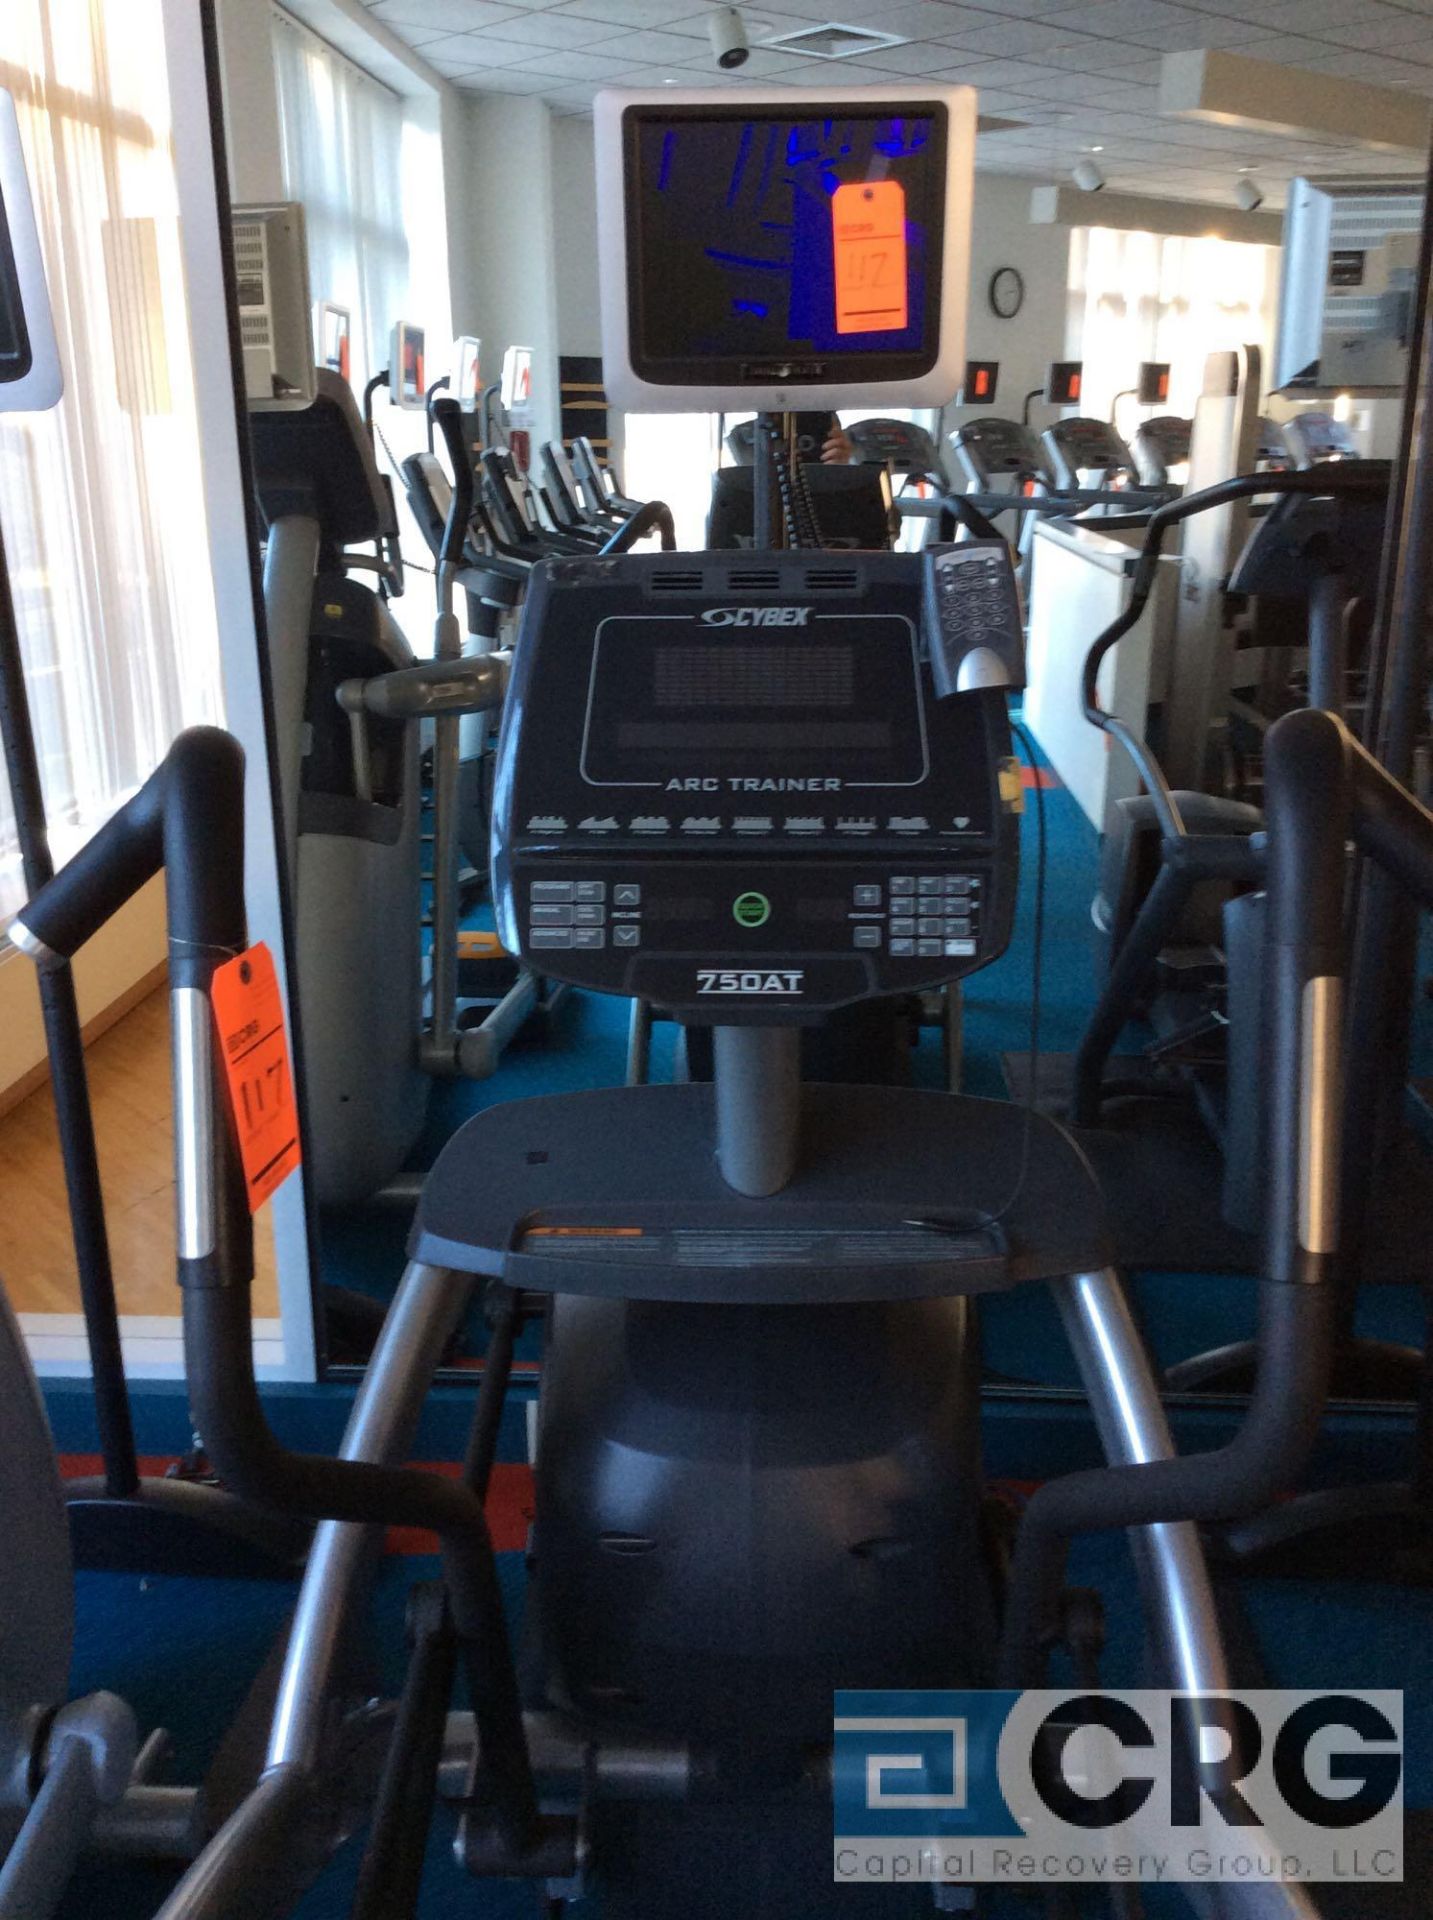 Cybex 750 AT Arc Trainer Machine, with Cardio Theater monitor - Image 3 of 3